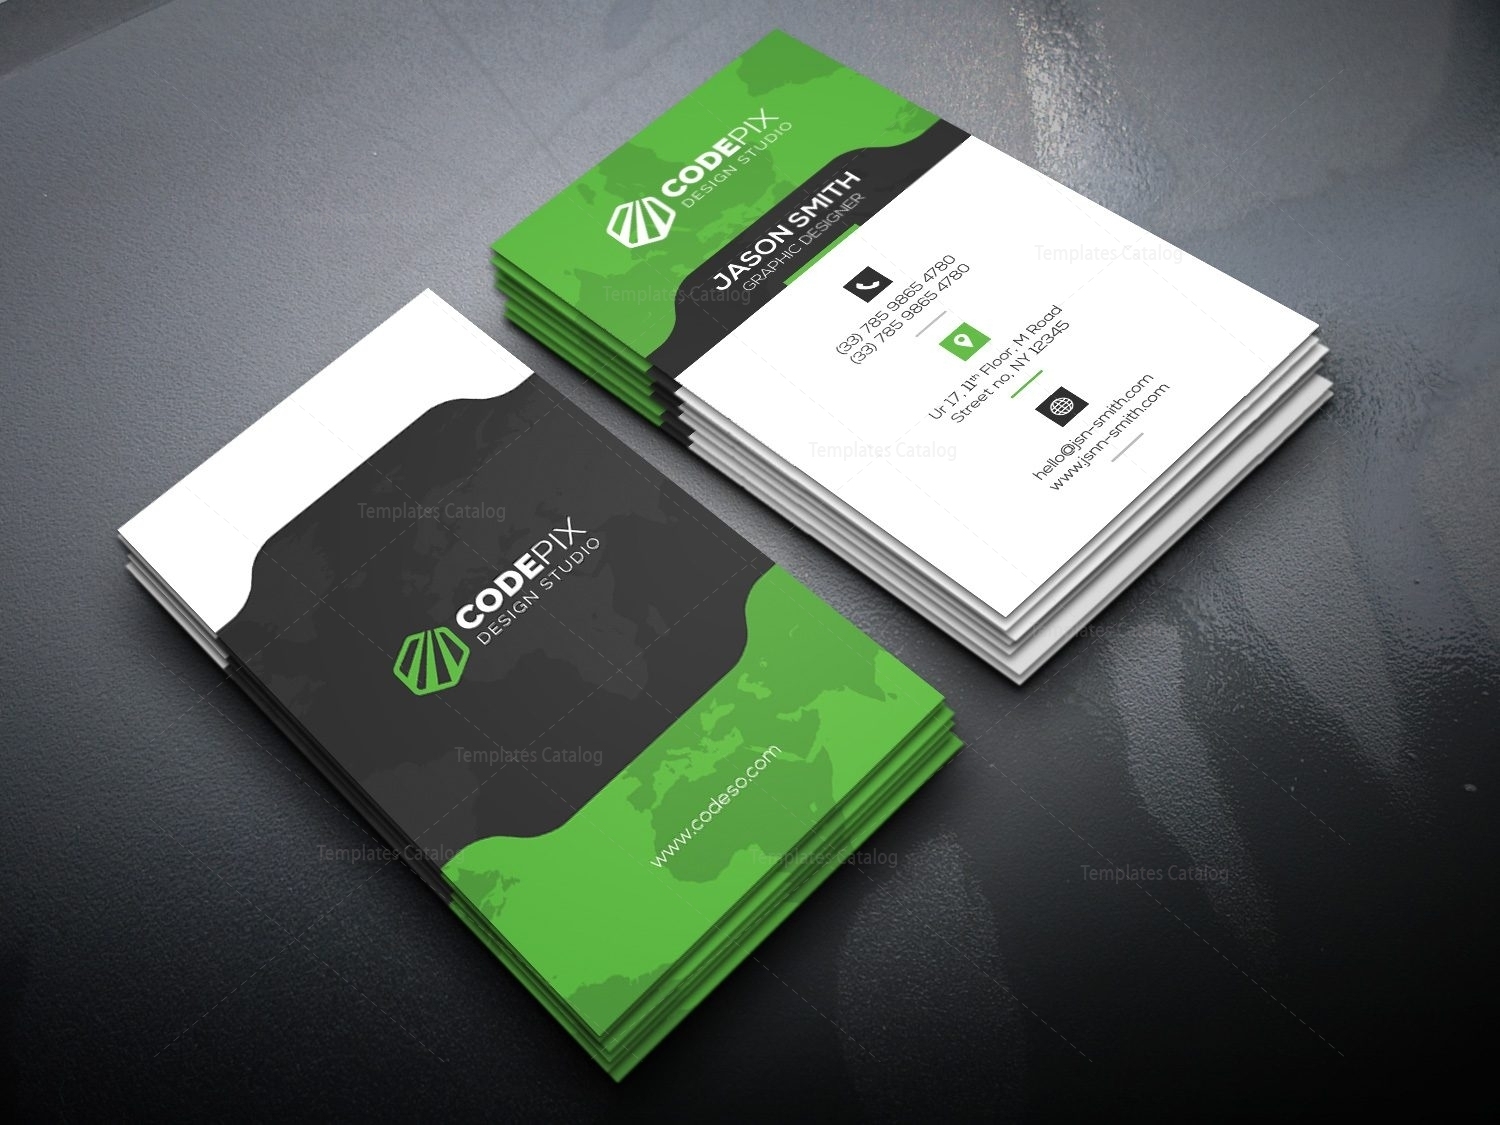 Vertical Business Card With Stylish Design 000521 - Template Catalog regarding Company Business Cards Templates